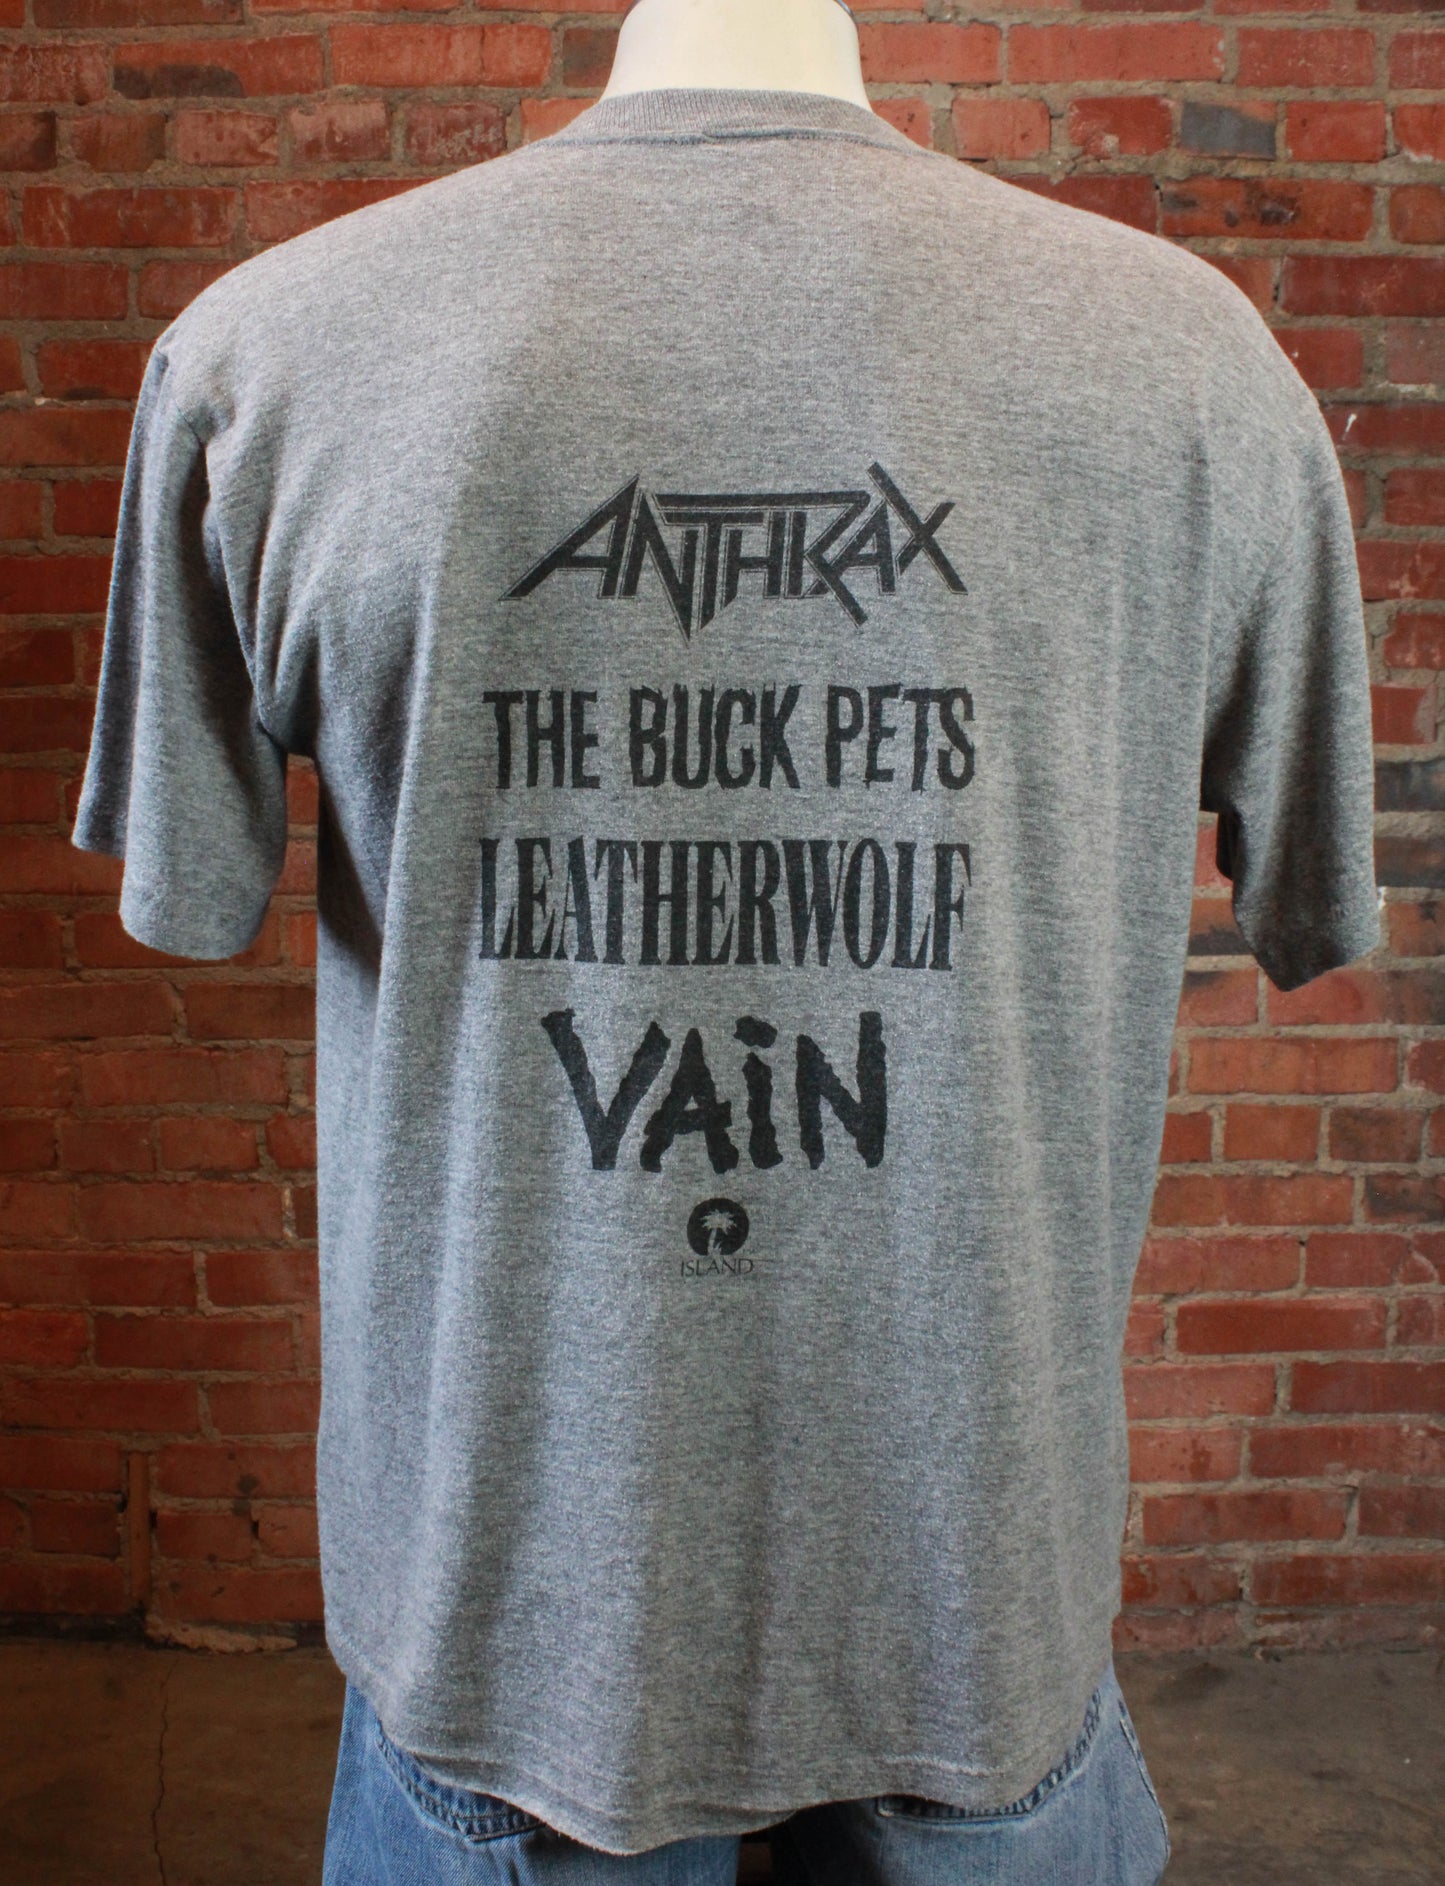 Vintage Island Records Promo T Shirt 80's Anthrax, The Buck Pets, Leatherwolf, Vain Extra Large